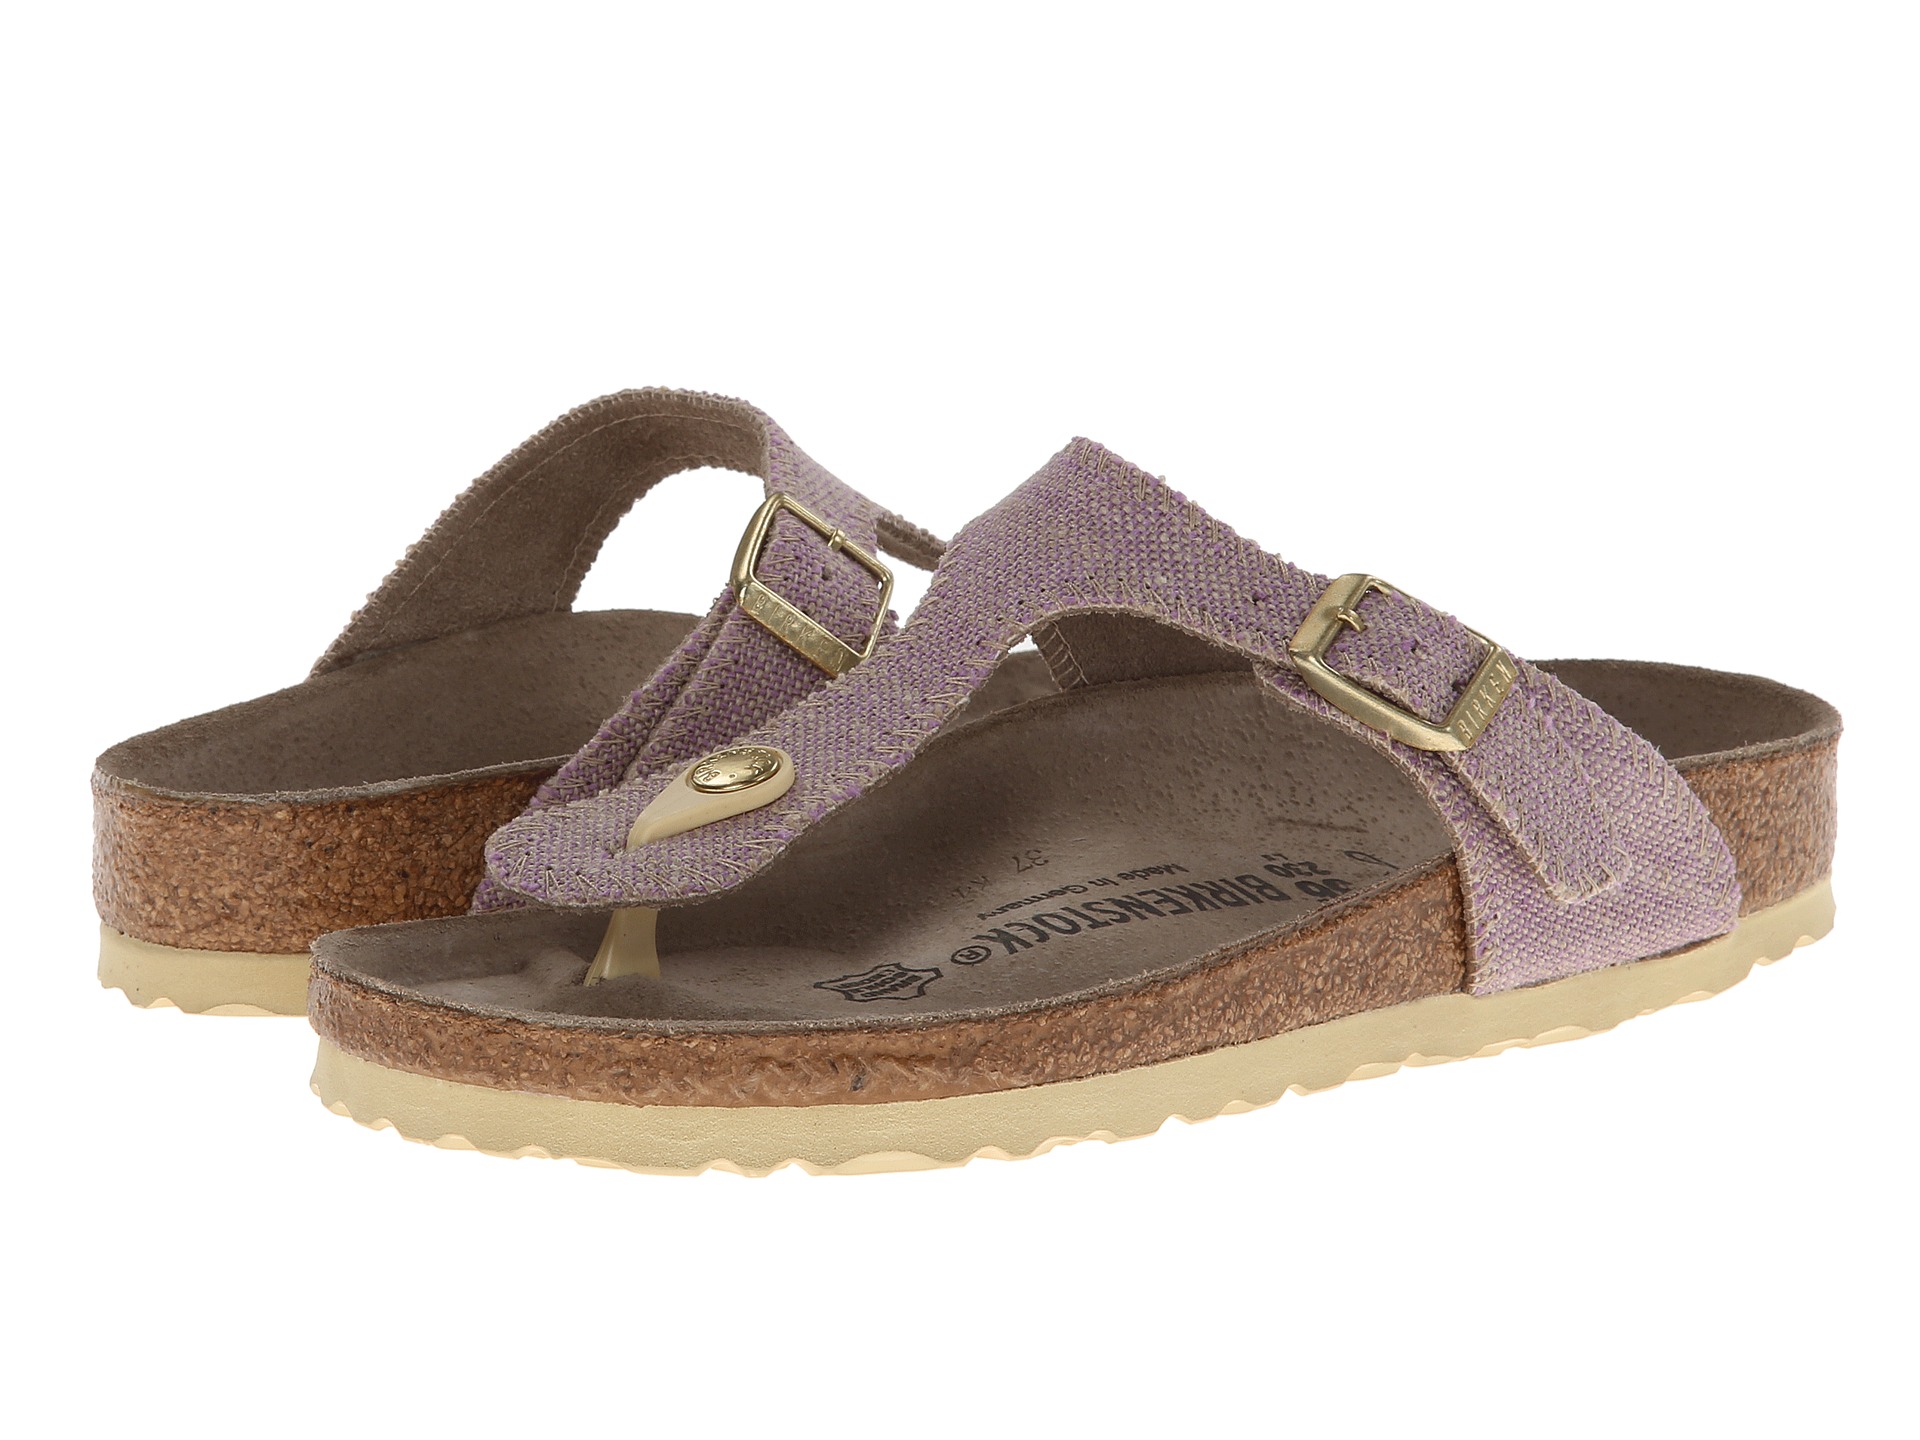 No results for birkenstock gizeh lilac linen - Search Zappos